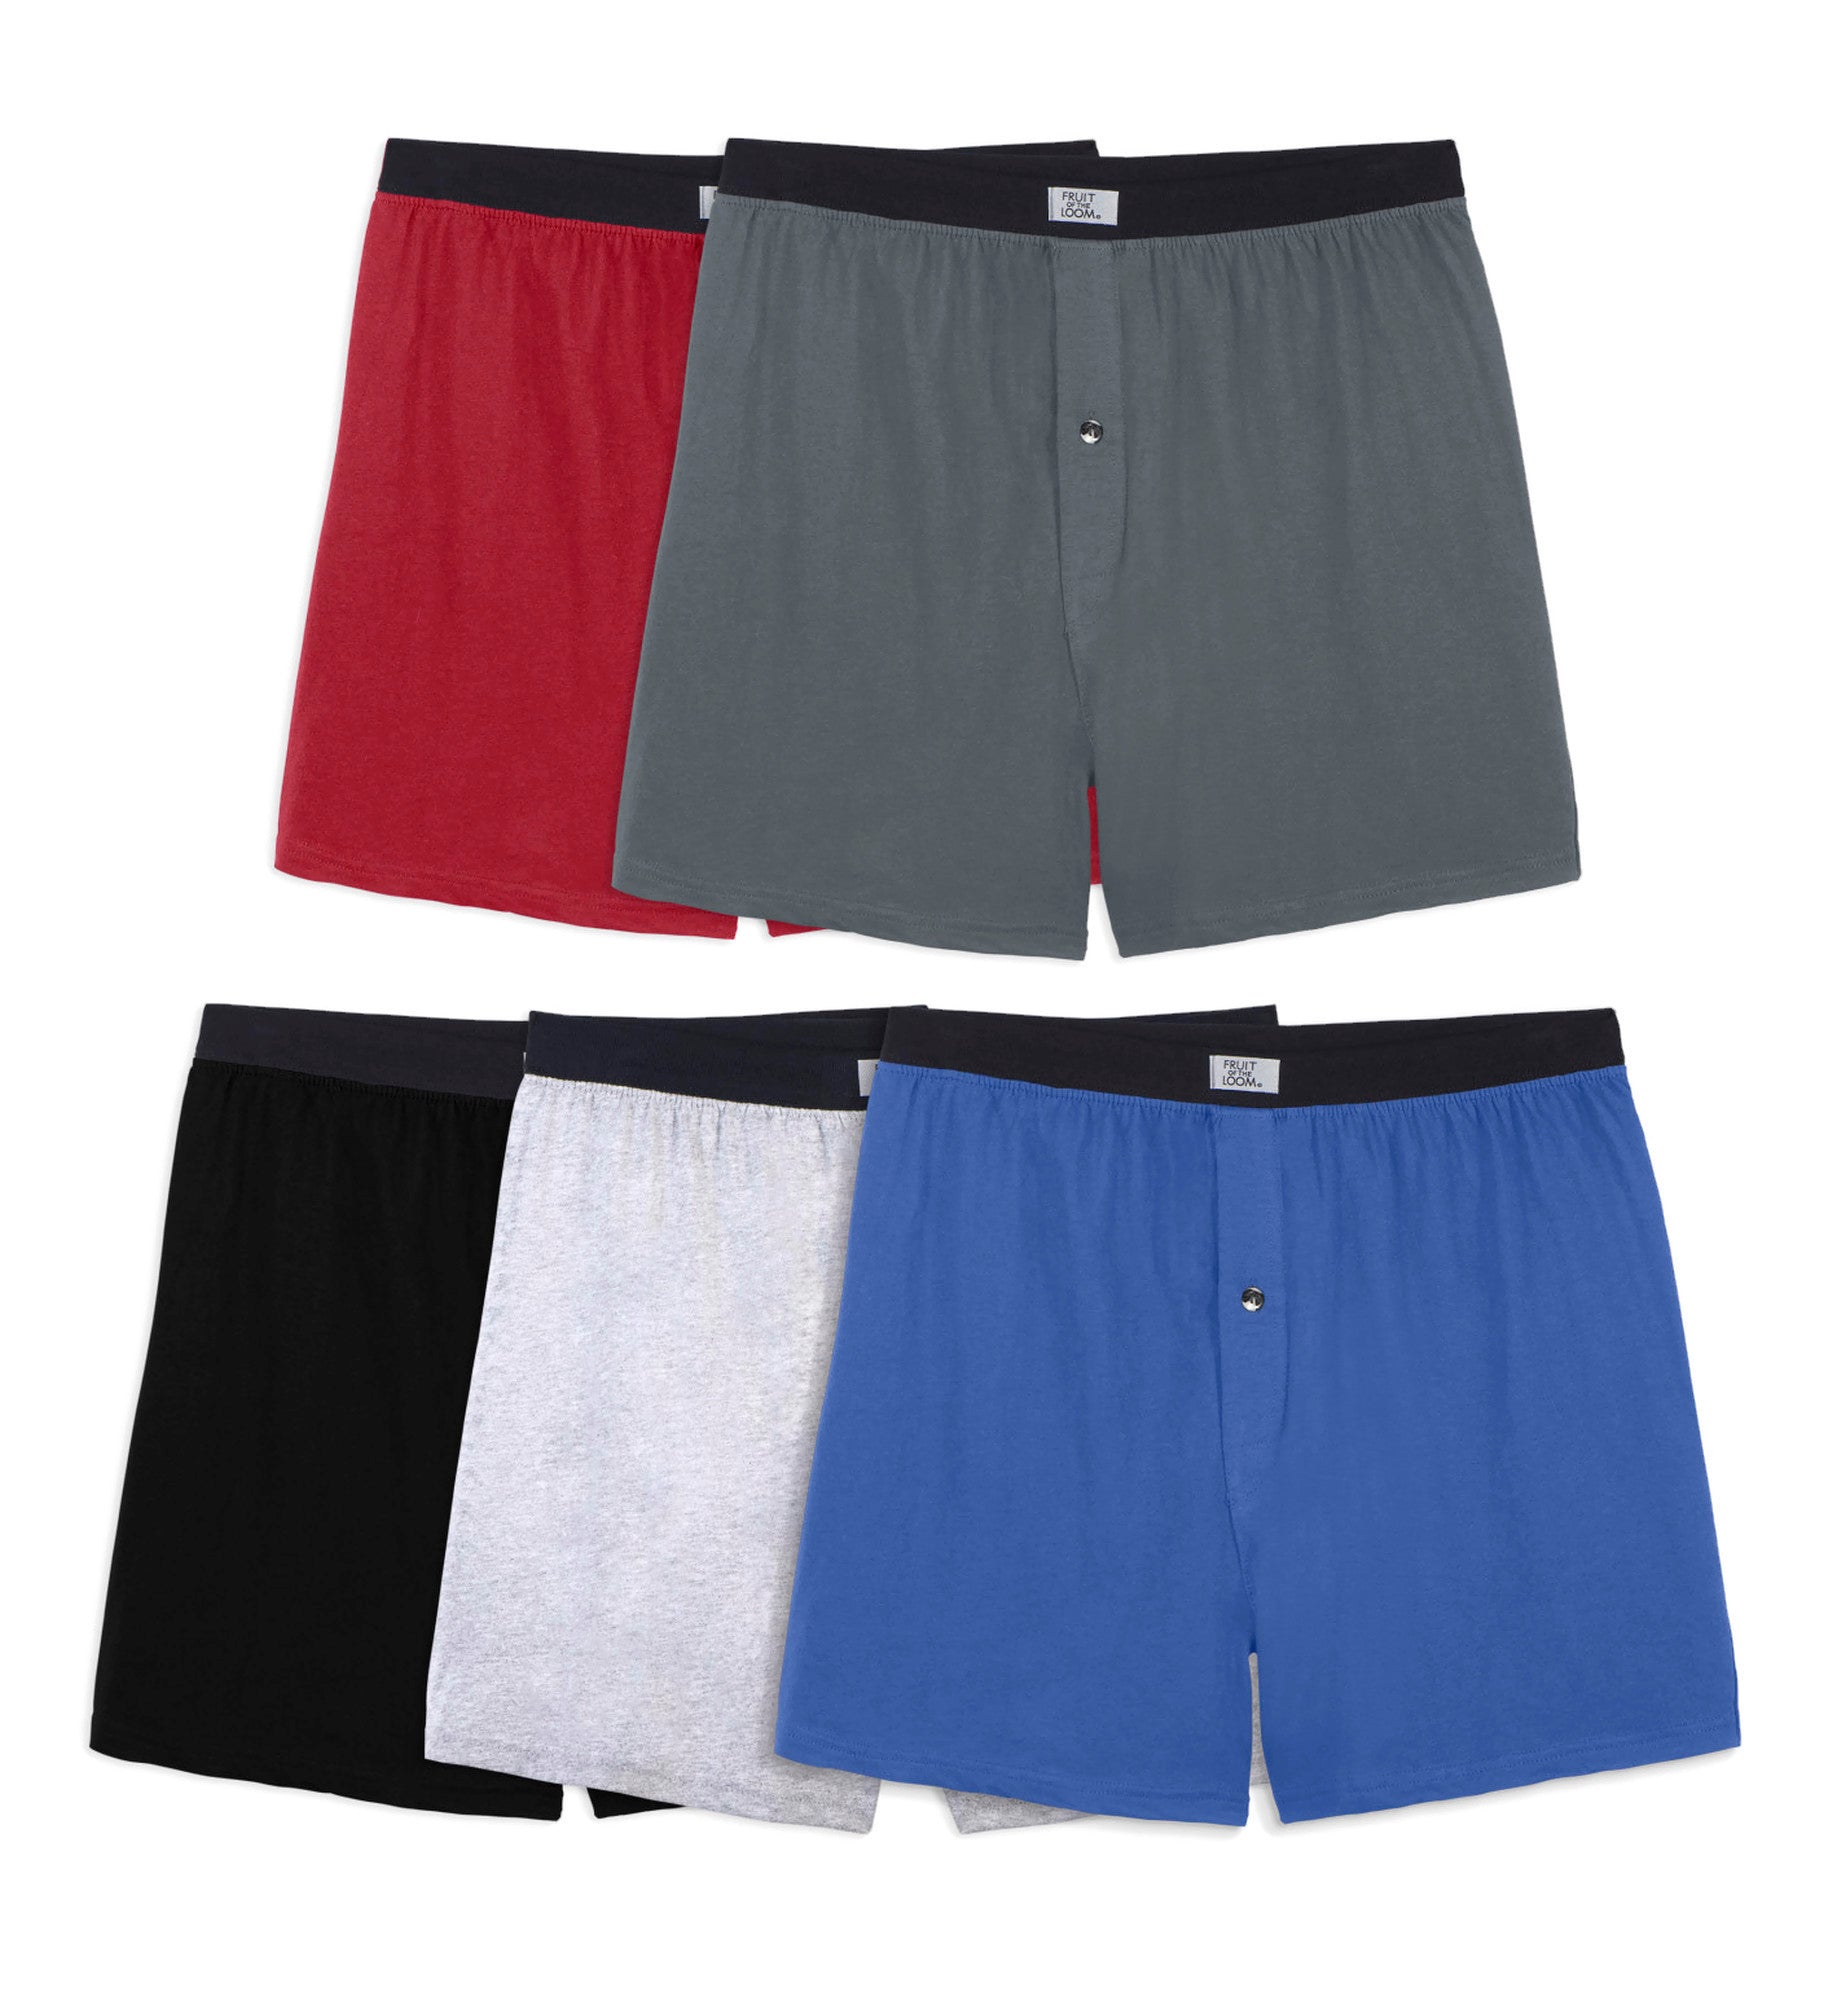 FTL-5P540TG - Fruit Of The Loom Mens Knit Boxers 5 Pack, S, Assorted